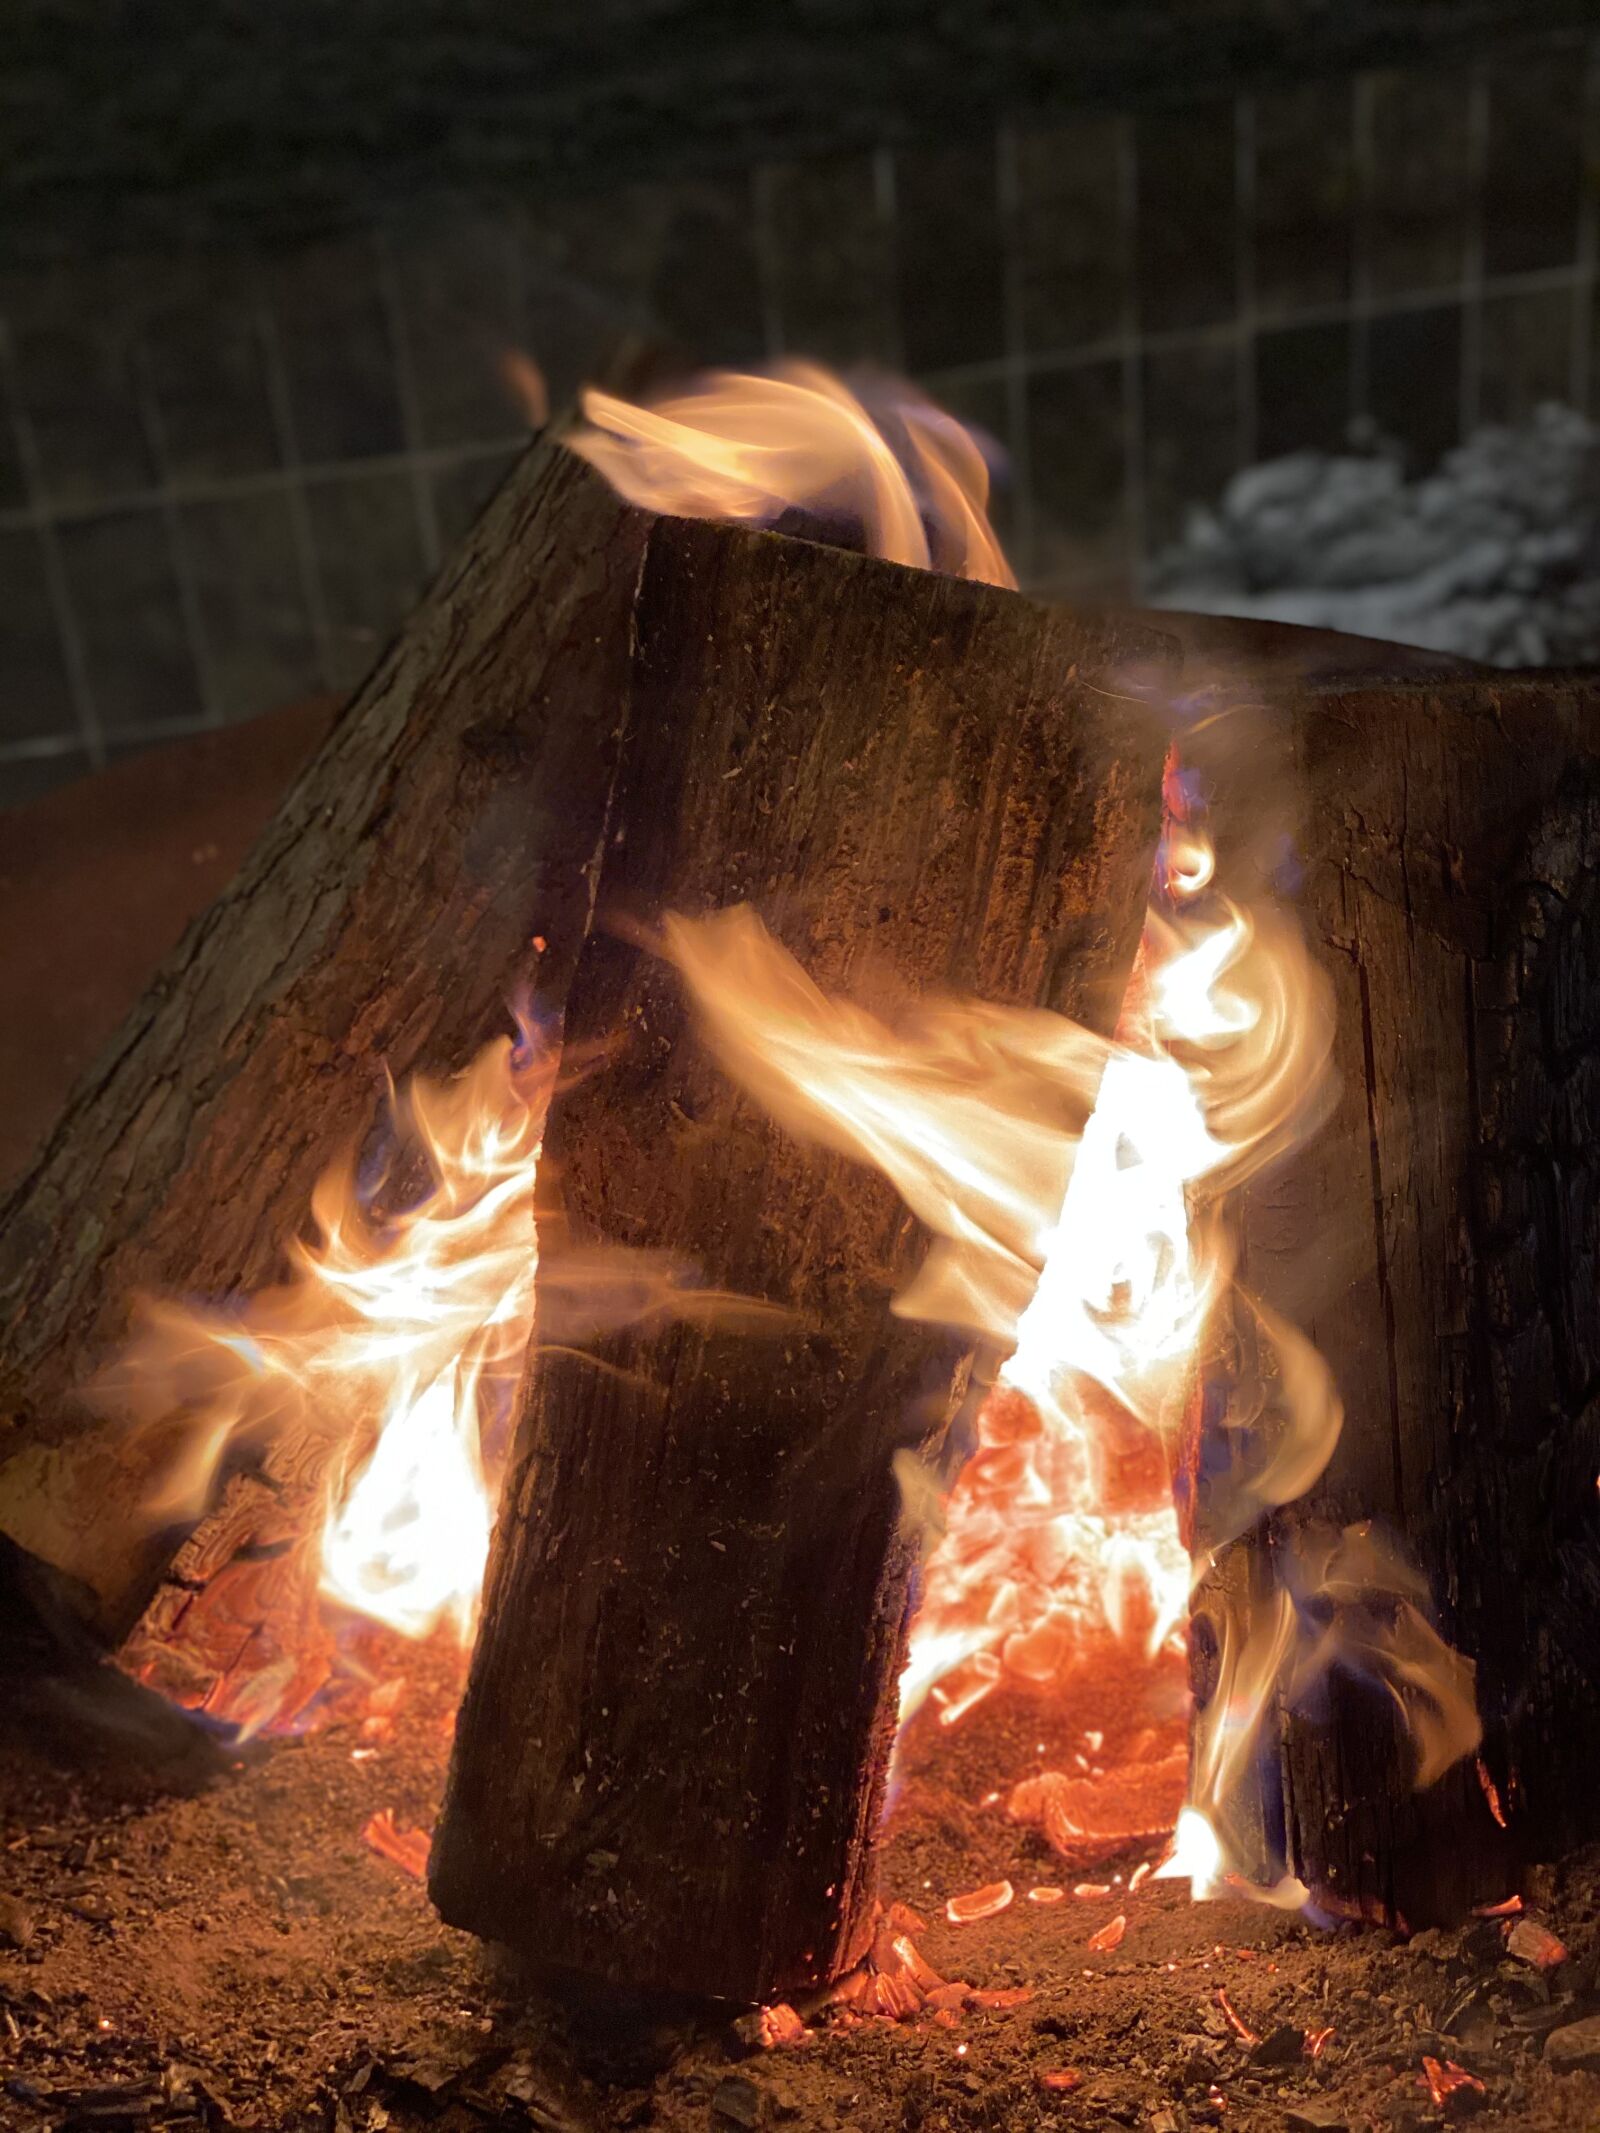 Apple iPhone 11 Pro + iPhone 11 Pro back dual camera 6mm f/2 sample photo. Fire, wood, flame photography